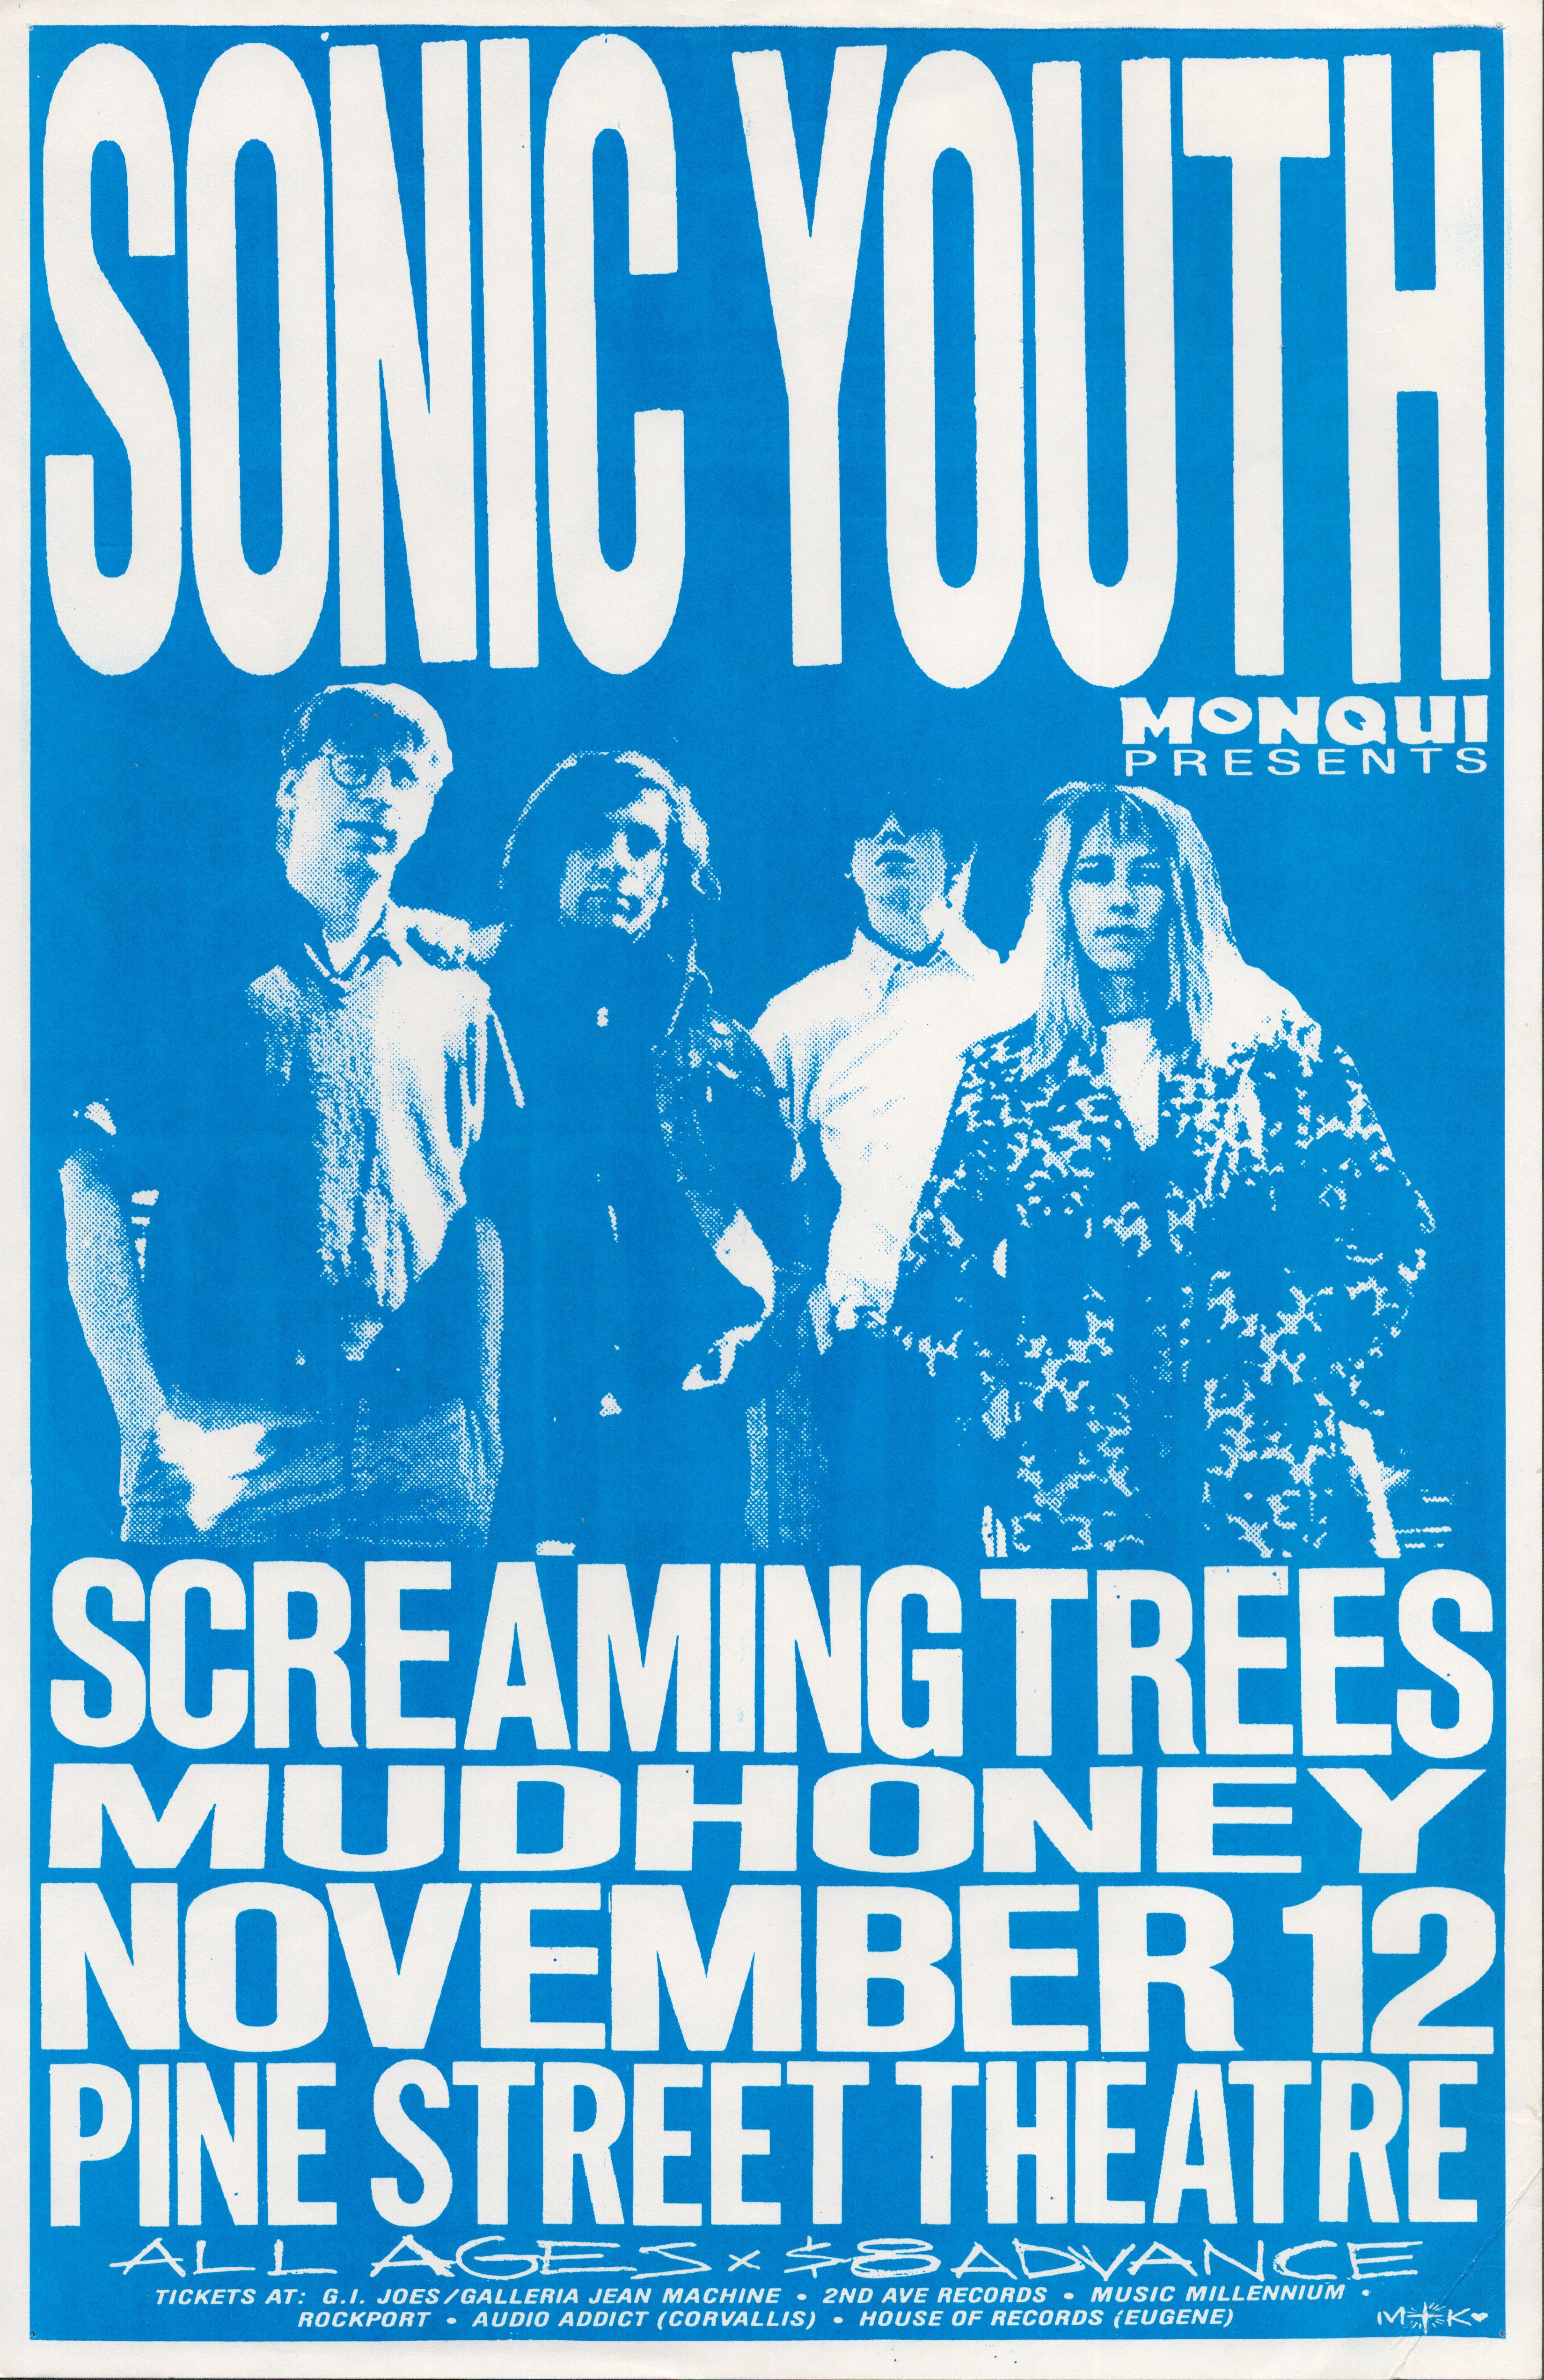 MXP-252.2 Sonic Youth Pine Street Theatre 1988 Concert Poster